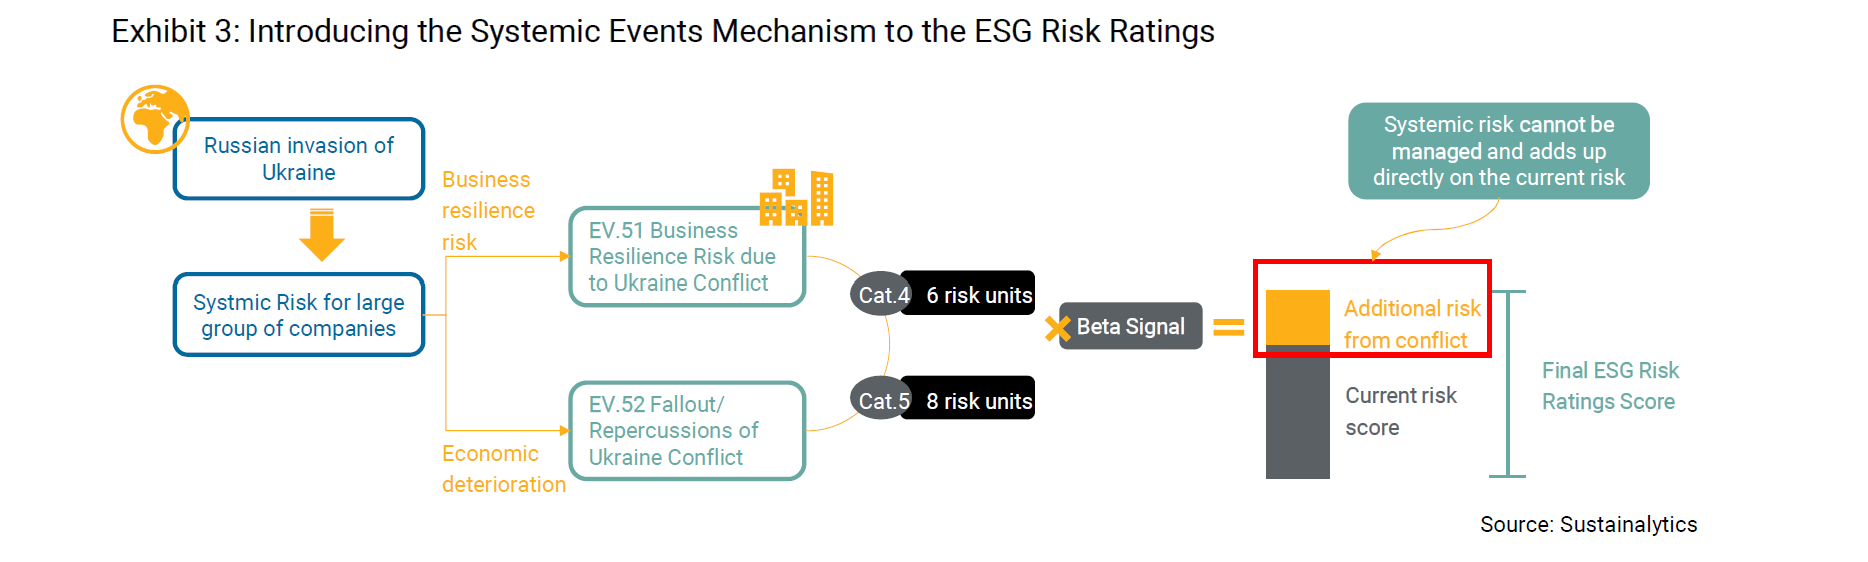 Introducing the Systemic Events Mechanism to the ESG Risk Ratings